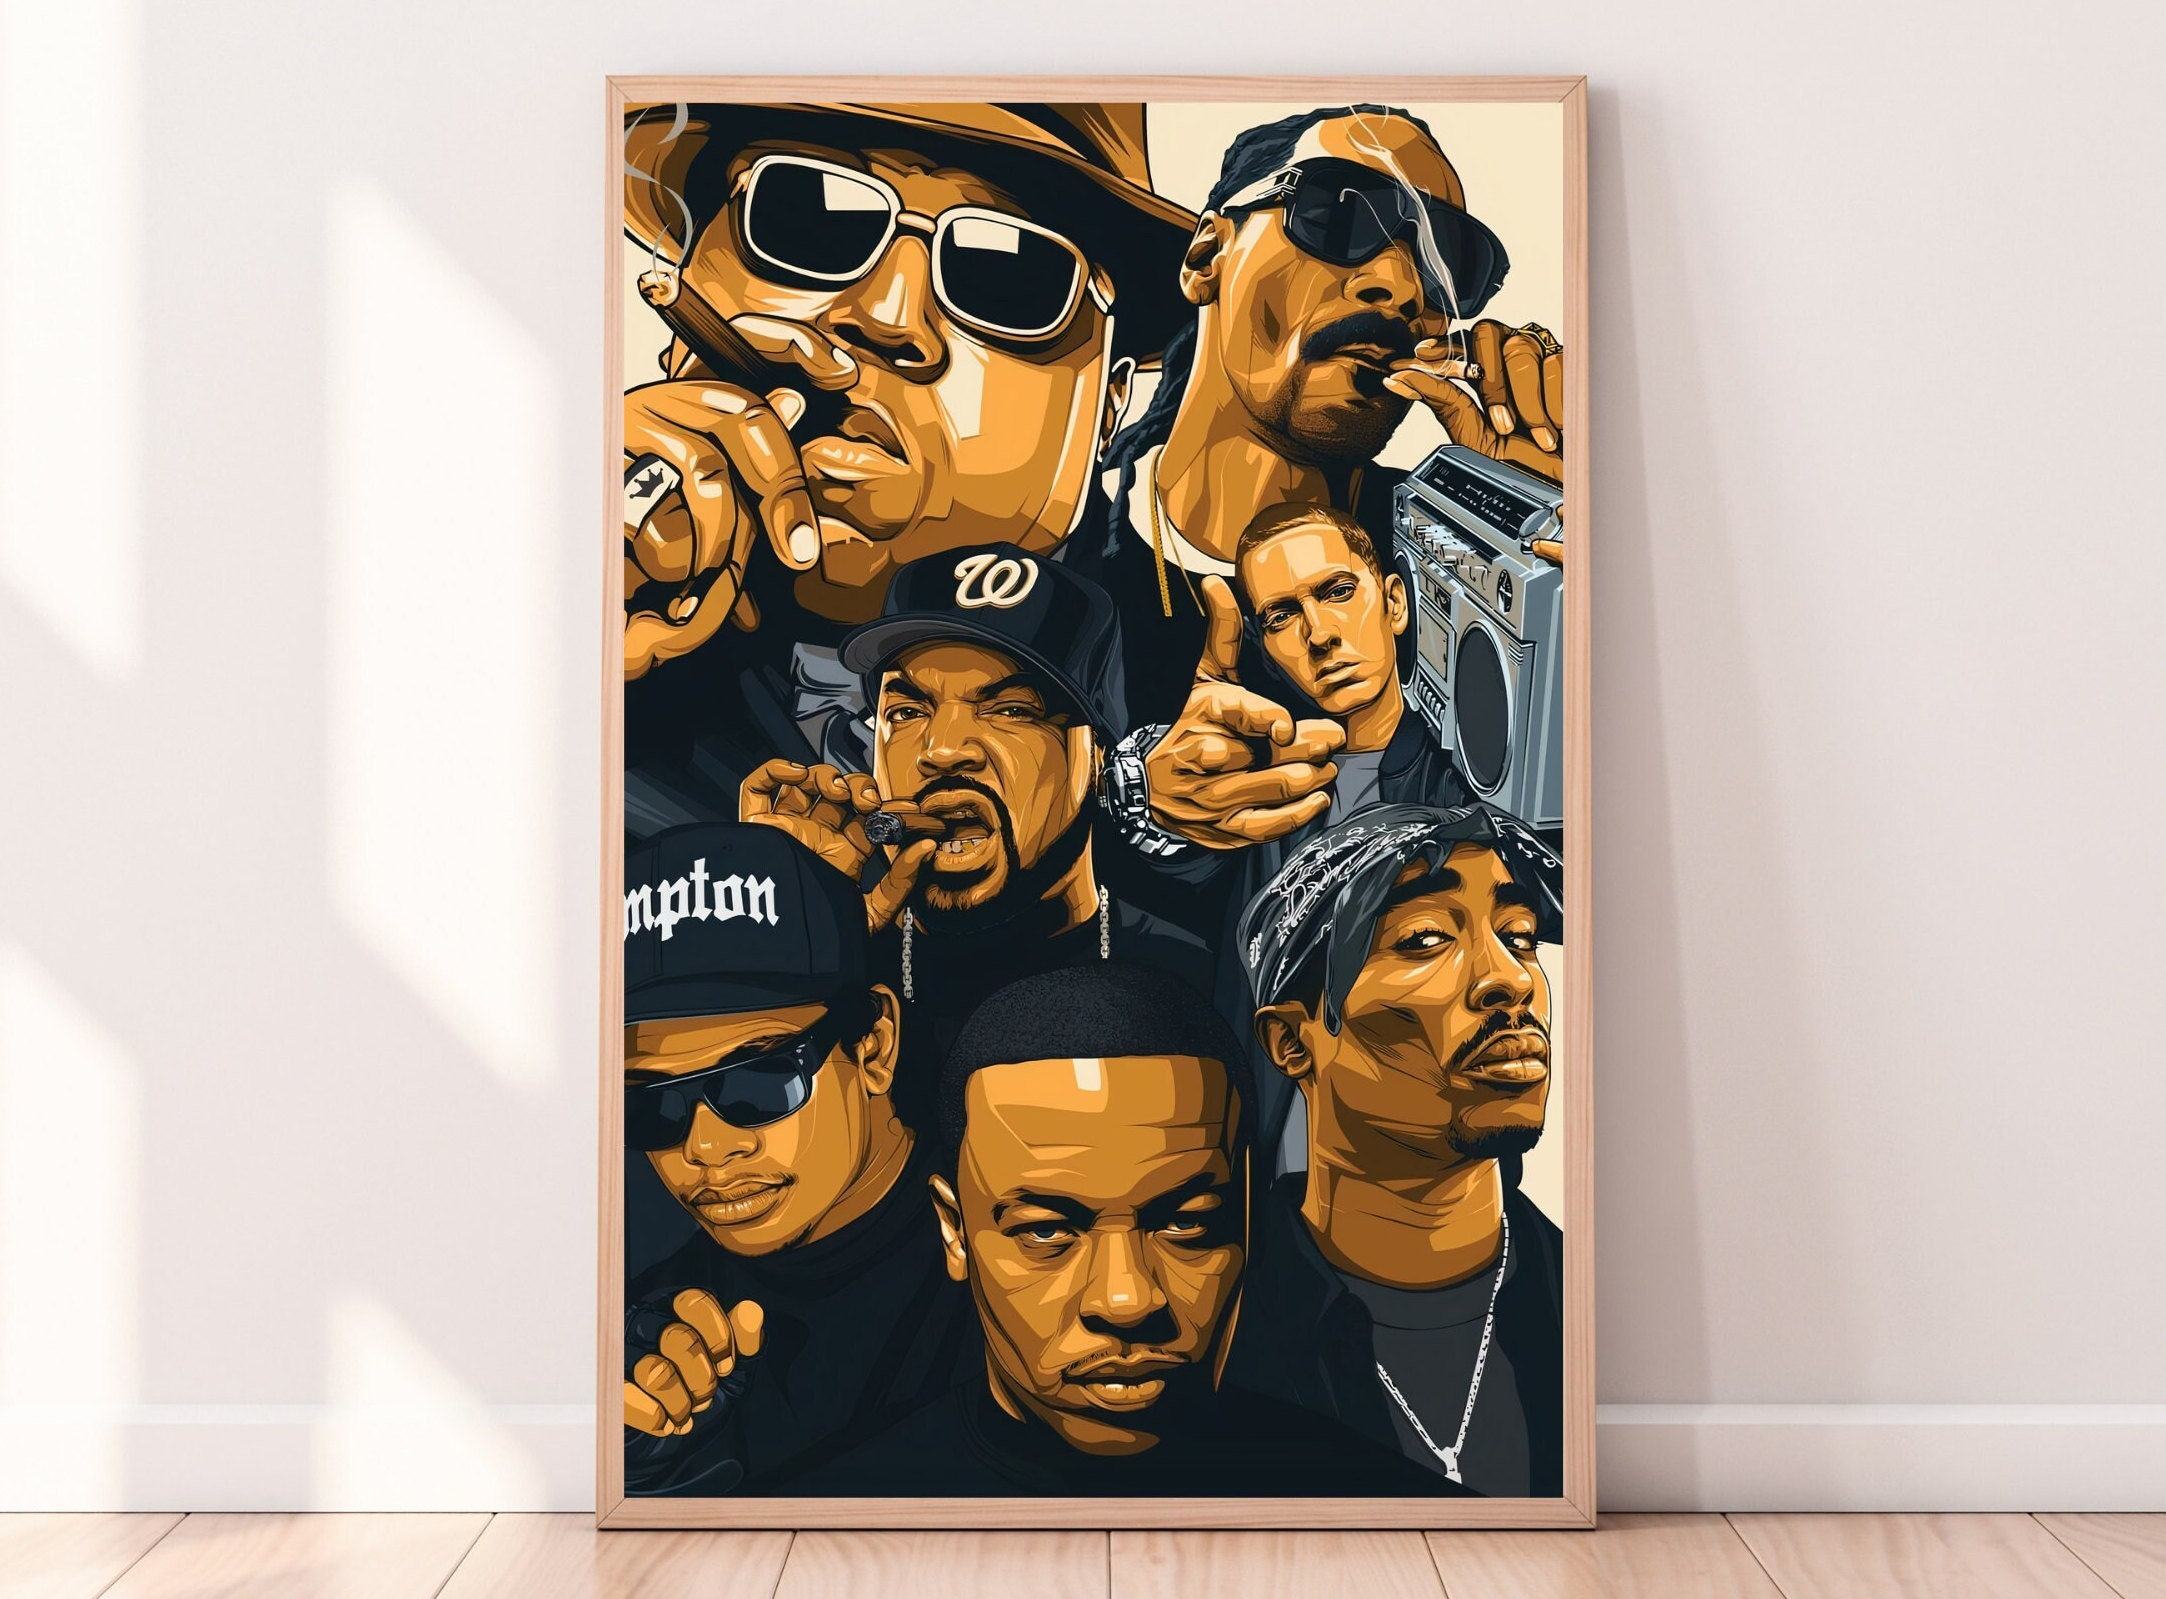  Dr. Dre 2001 Poster Canvas Poster Wall Art Decor Print Picture  Paintings for Living Room Bedroom Decoration Frame-style16x24inch(40x60cm):  Posters & Prints